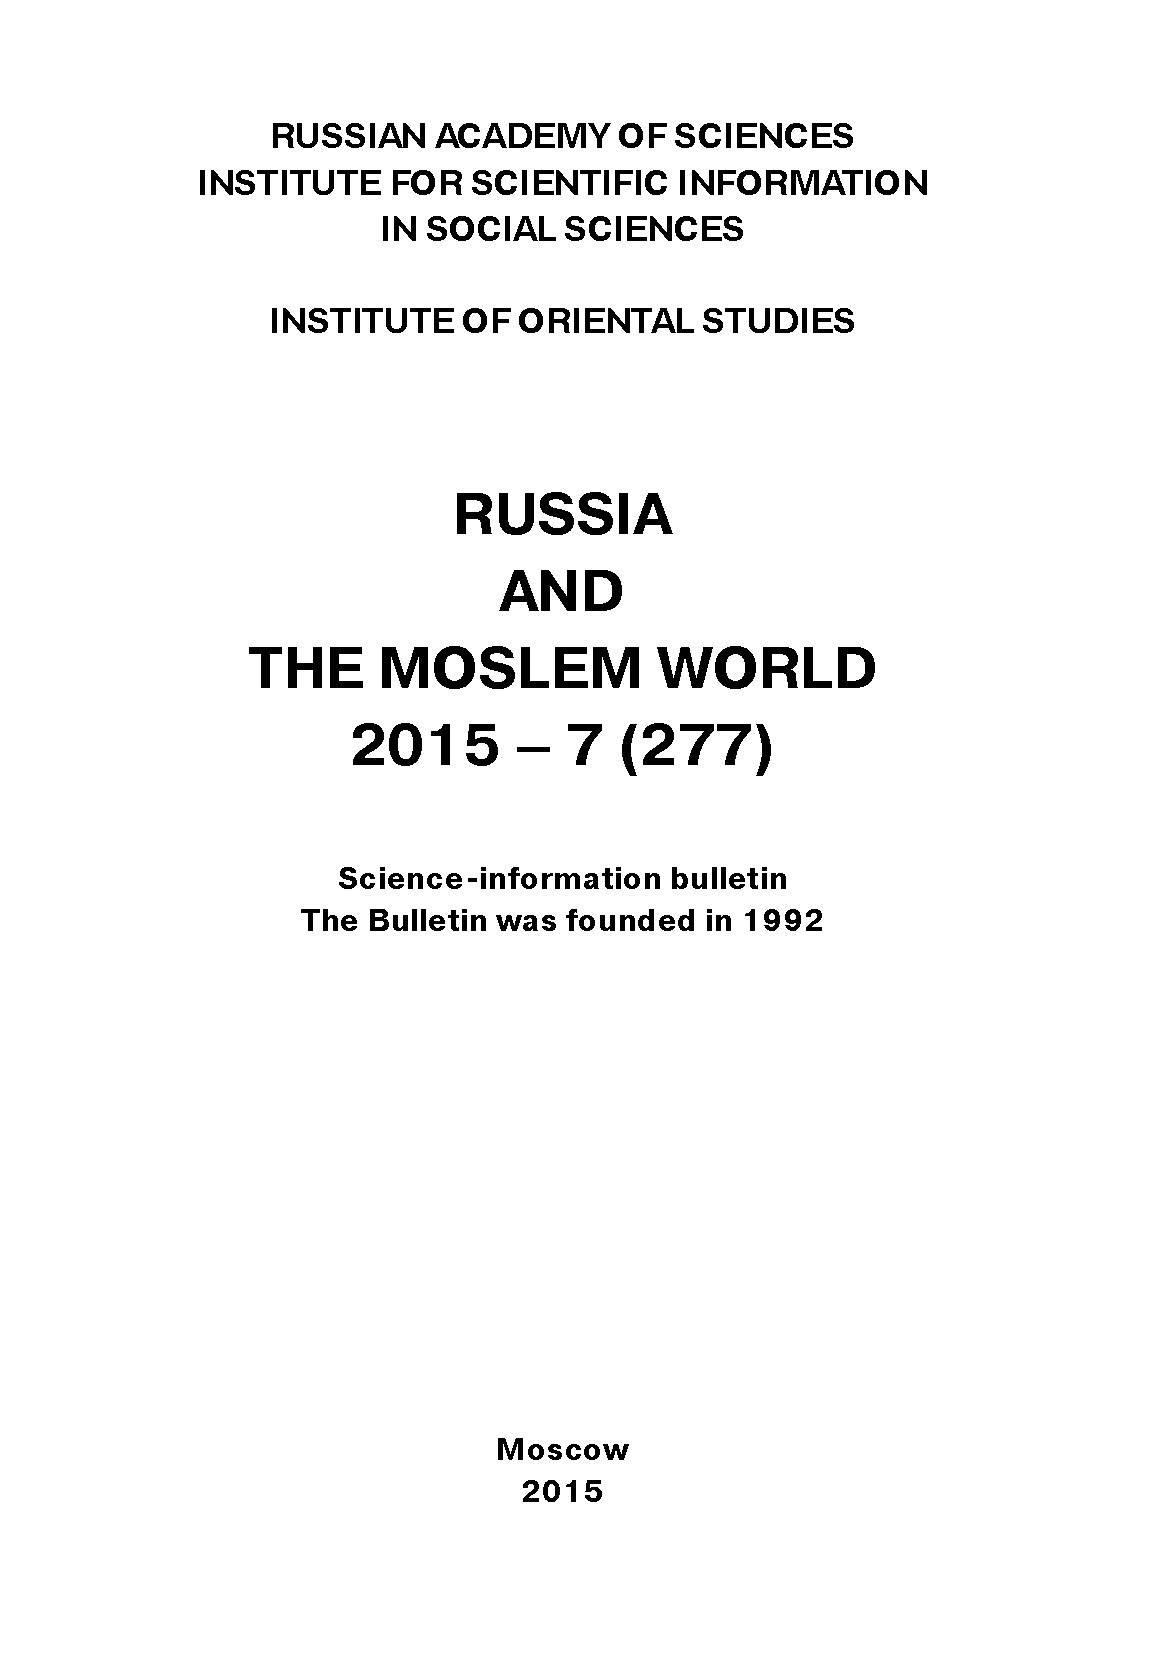 Russia and the Moslem World№ 07 / 2015